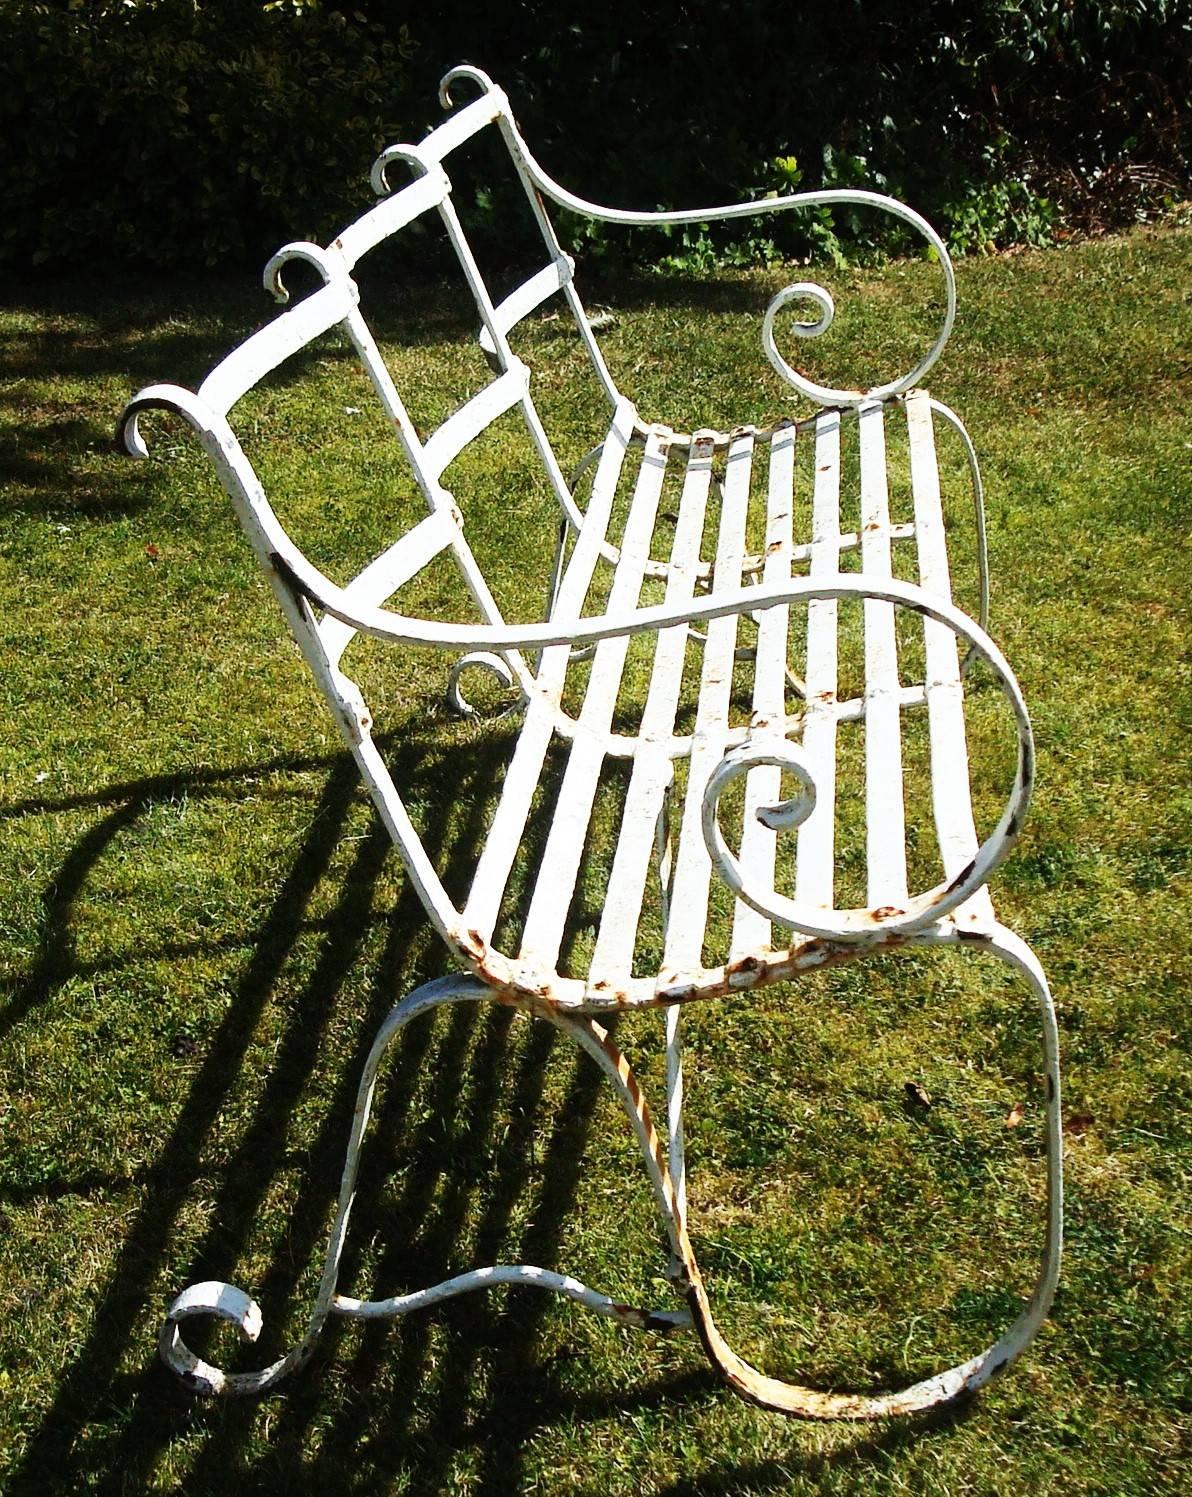 Regency Wrought Iron Garden Seat/ Bench In Good Condition For Sale In Moreton-in-Marsh, Gloucestershire